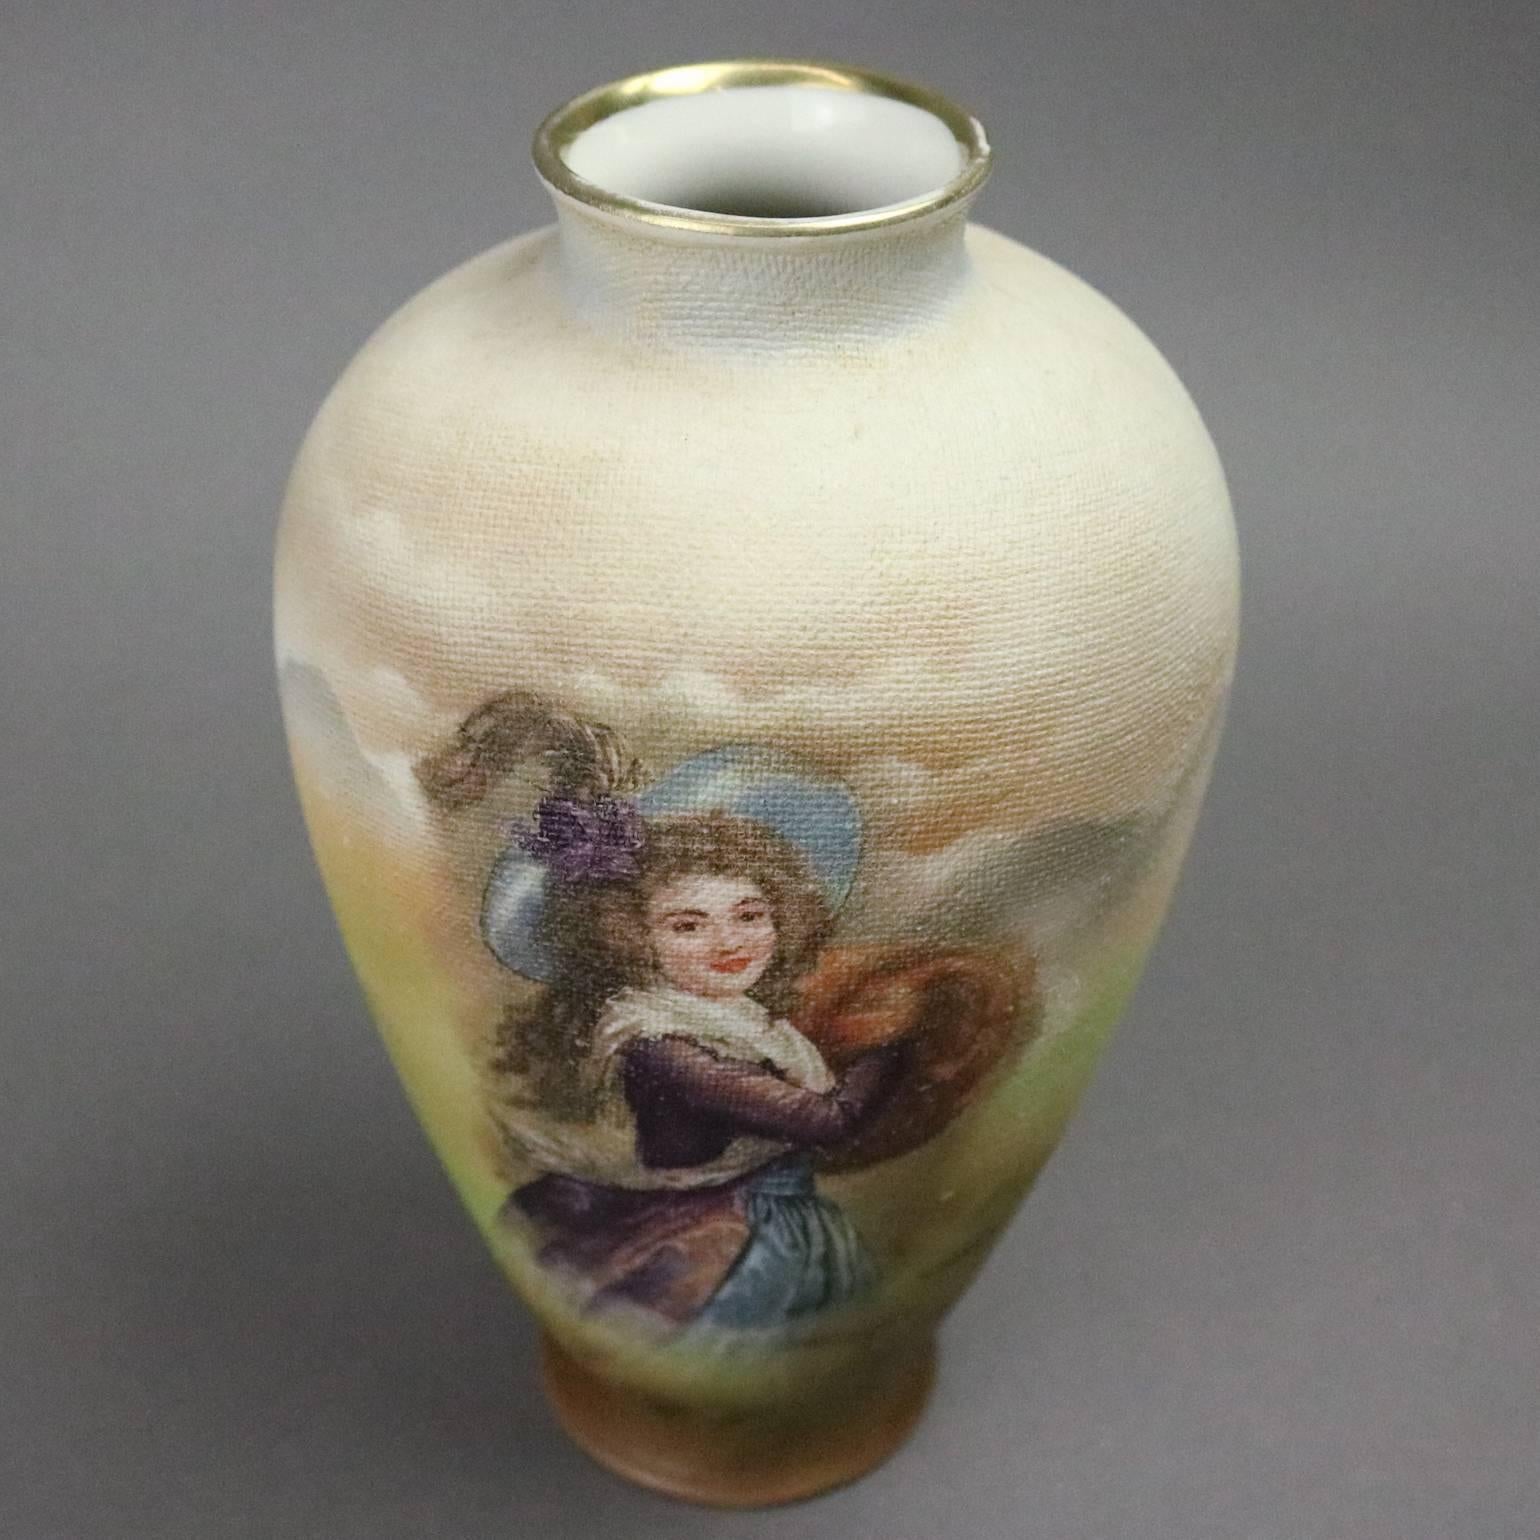 Antique German Royal Bayreuth Bavaria tapestry porcelain vase features hand-painted portrait of young woman, gilded vase mouth, maker's mark on base, circa 1820

Measures: 7" height x 4" diameter.